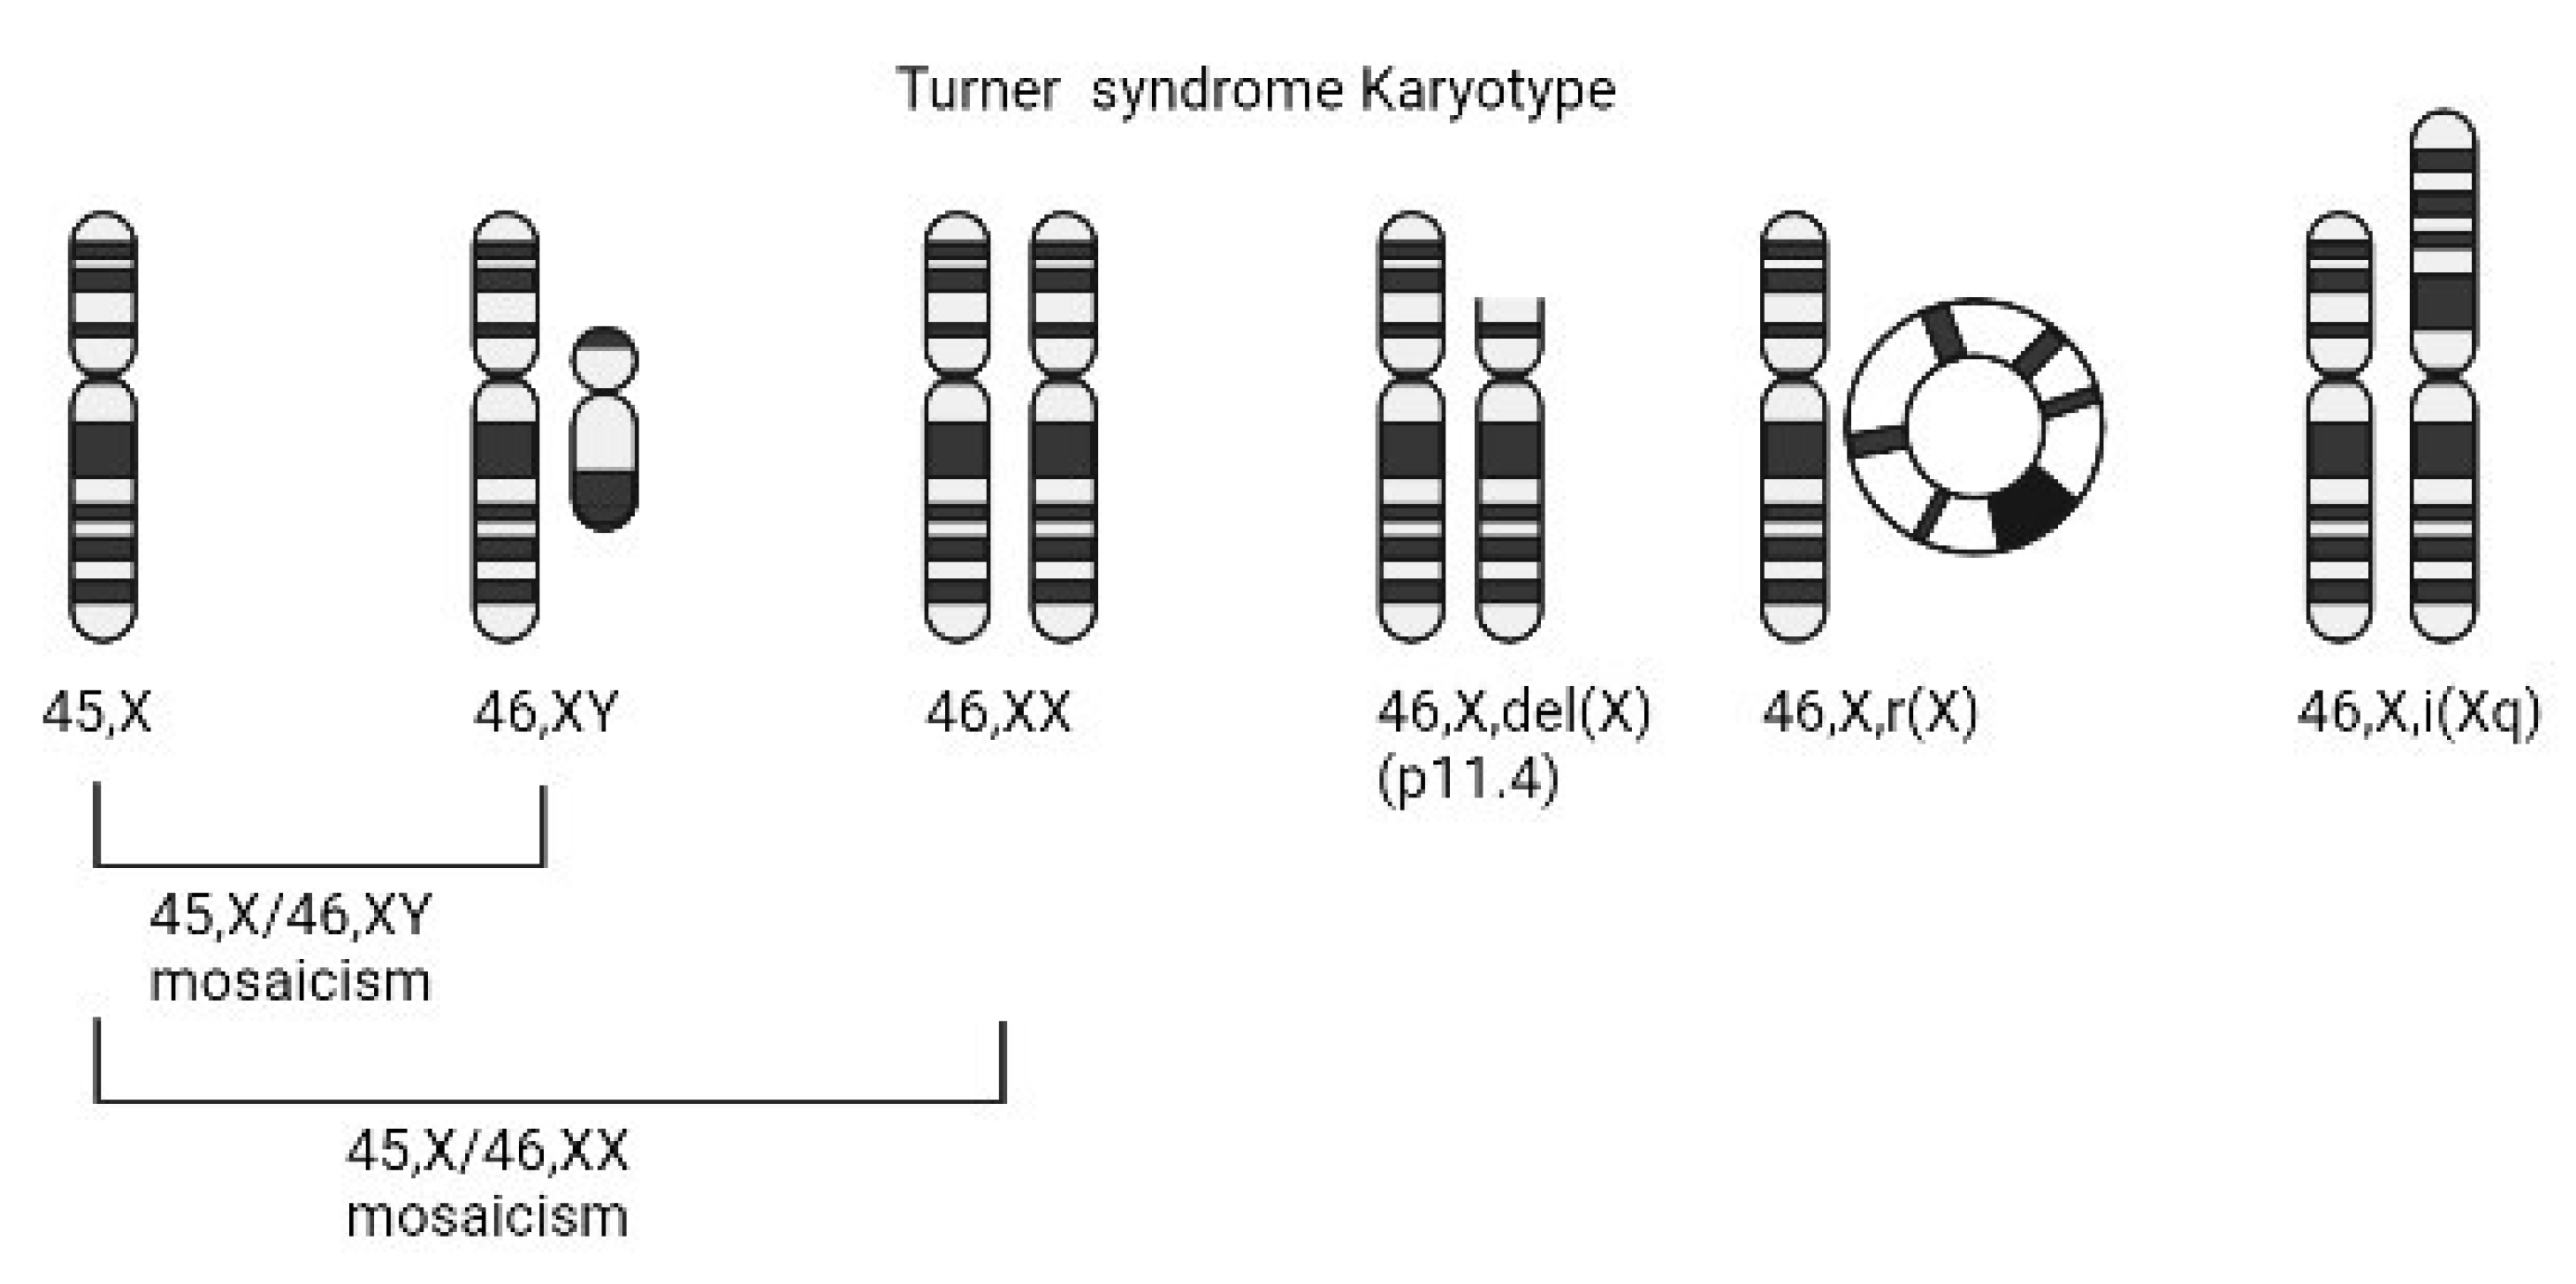 women with turner syndrome